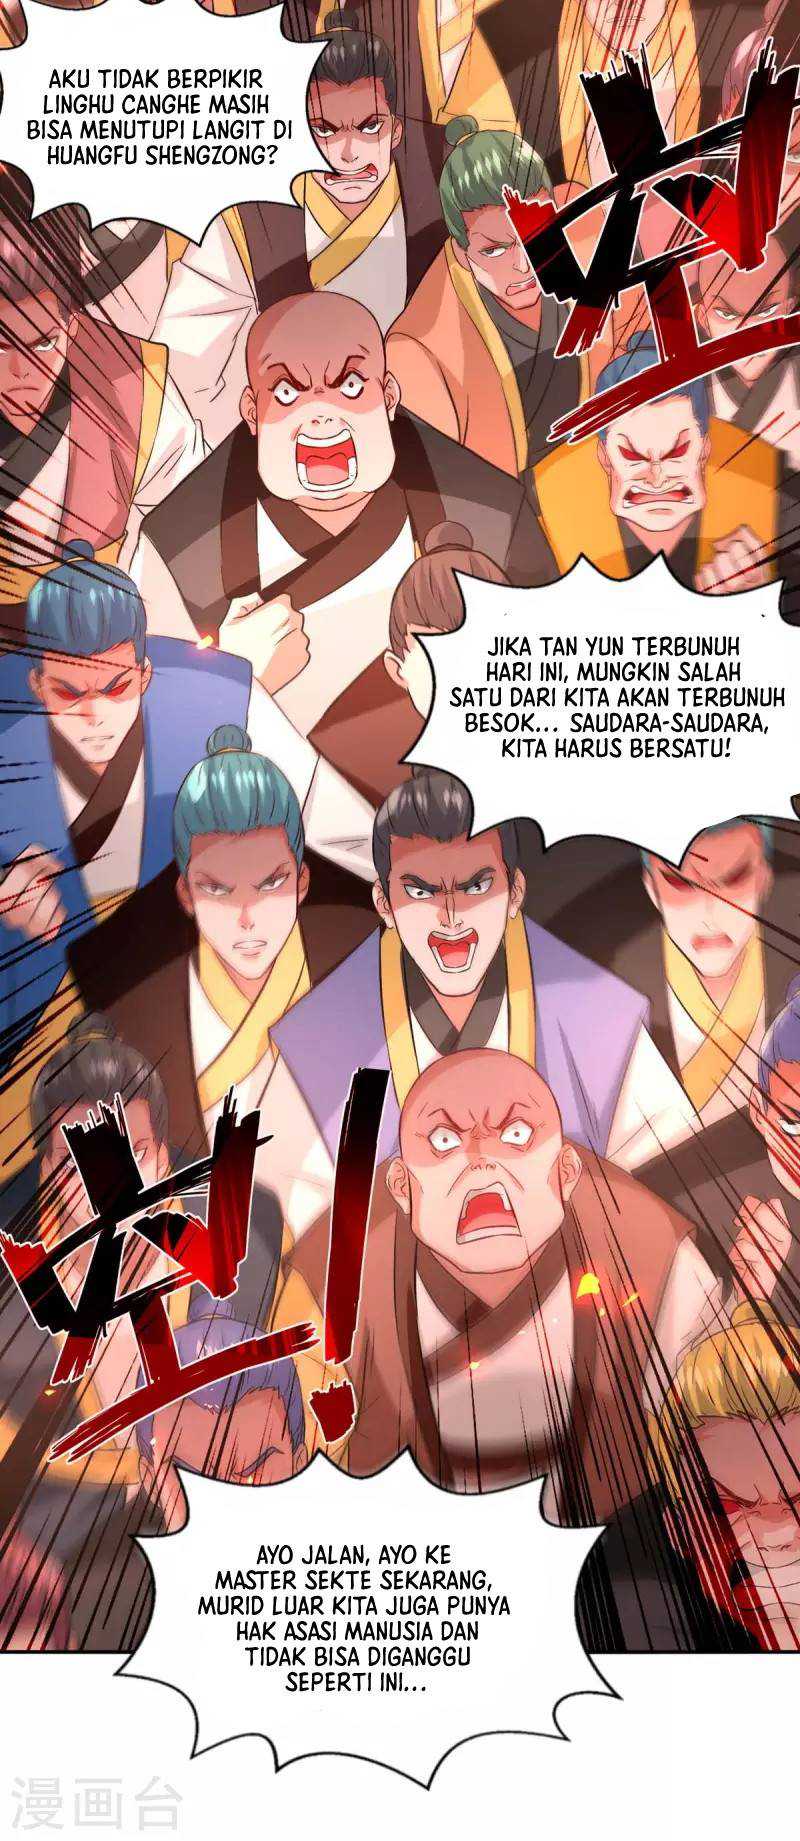 Against The Heaven Supreme (Heaven Guards) Chapter 85